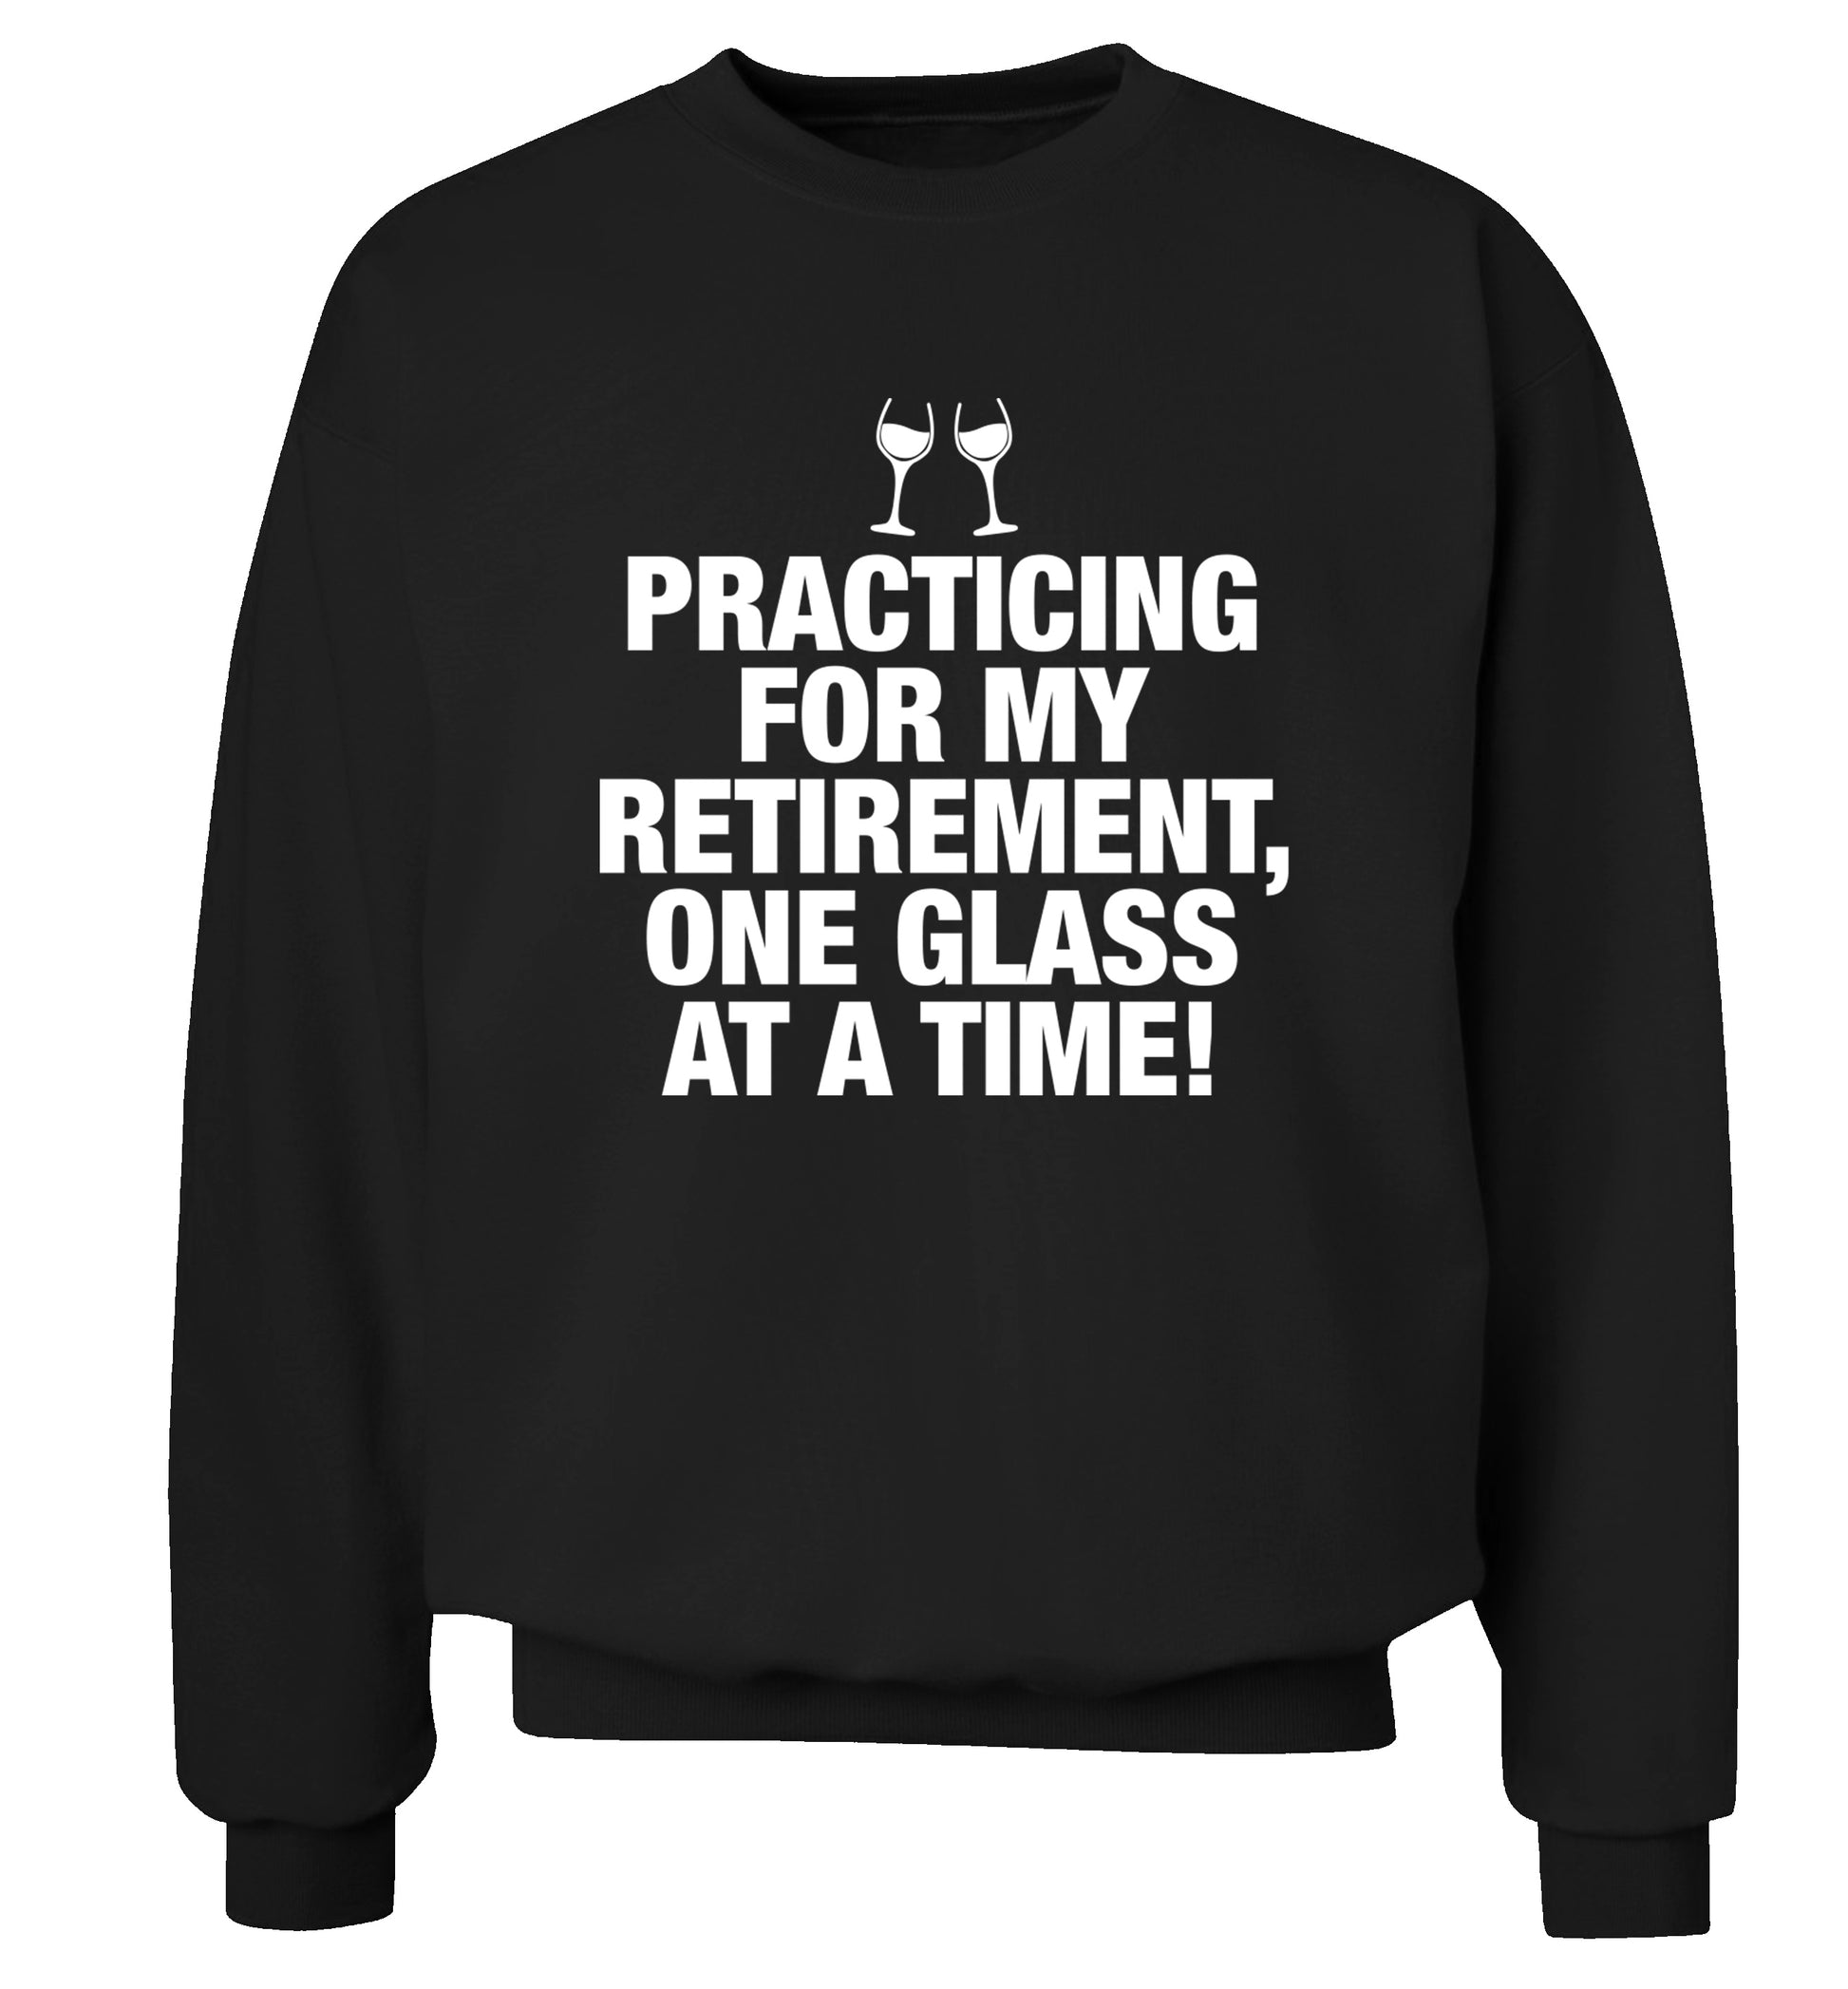 Practicing my retirement one glass at a time Adult's unisex black Sweater 2XL